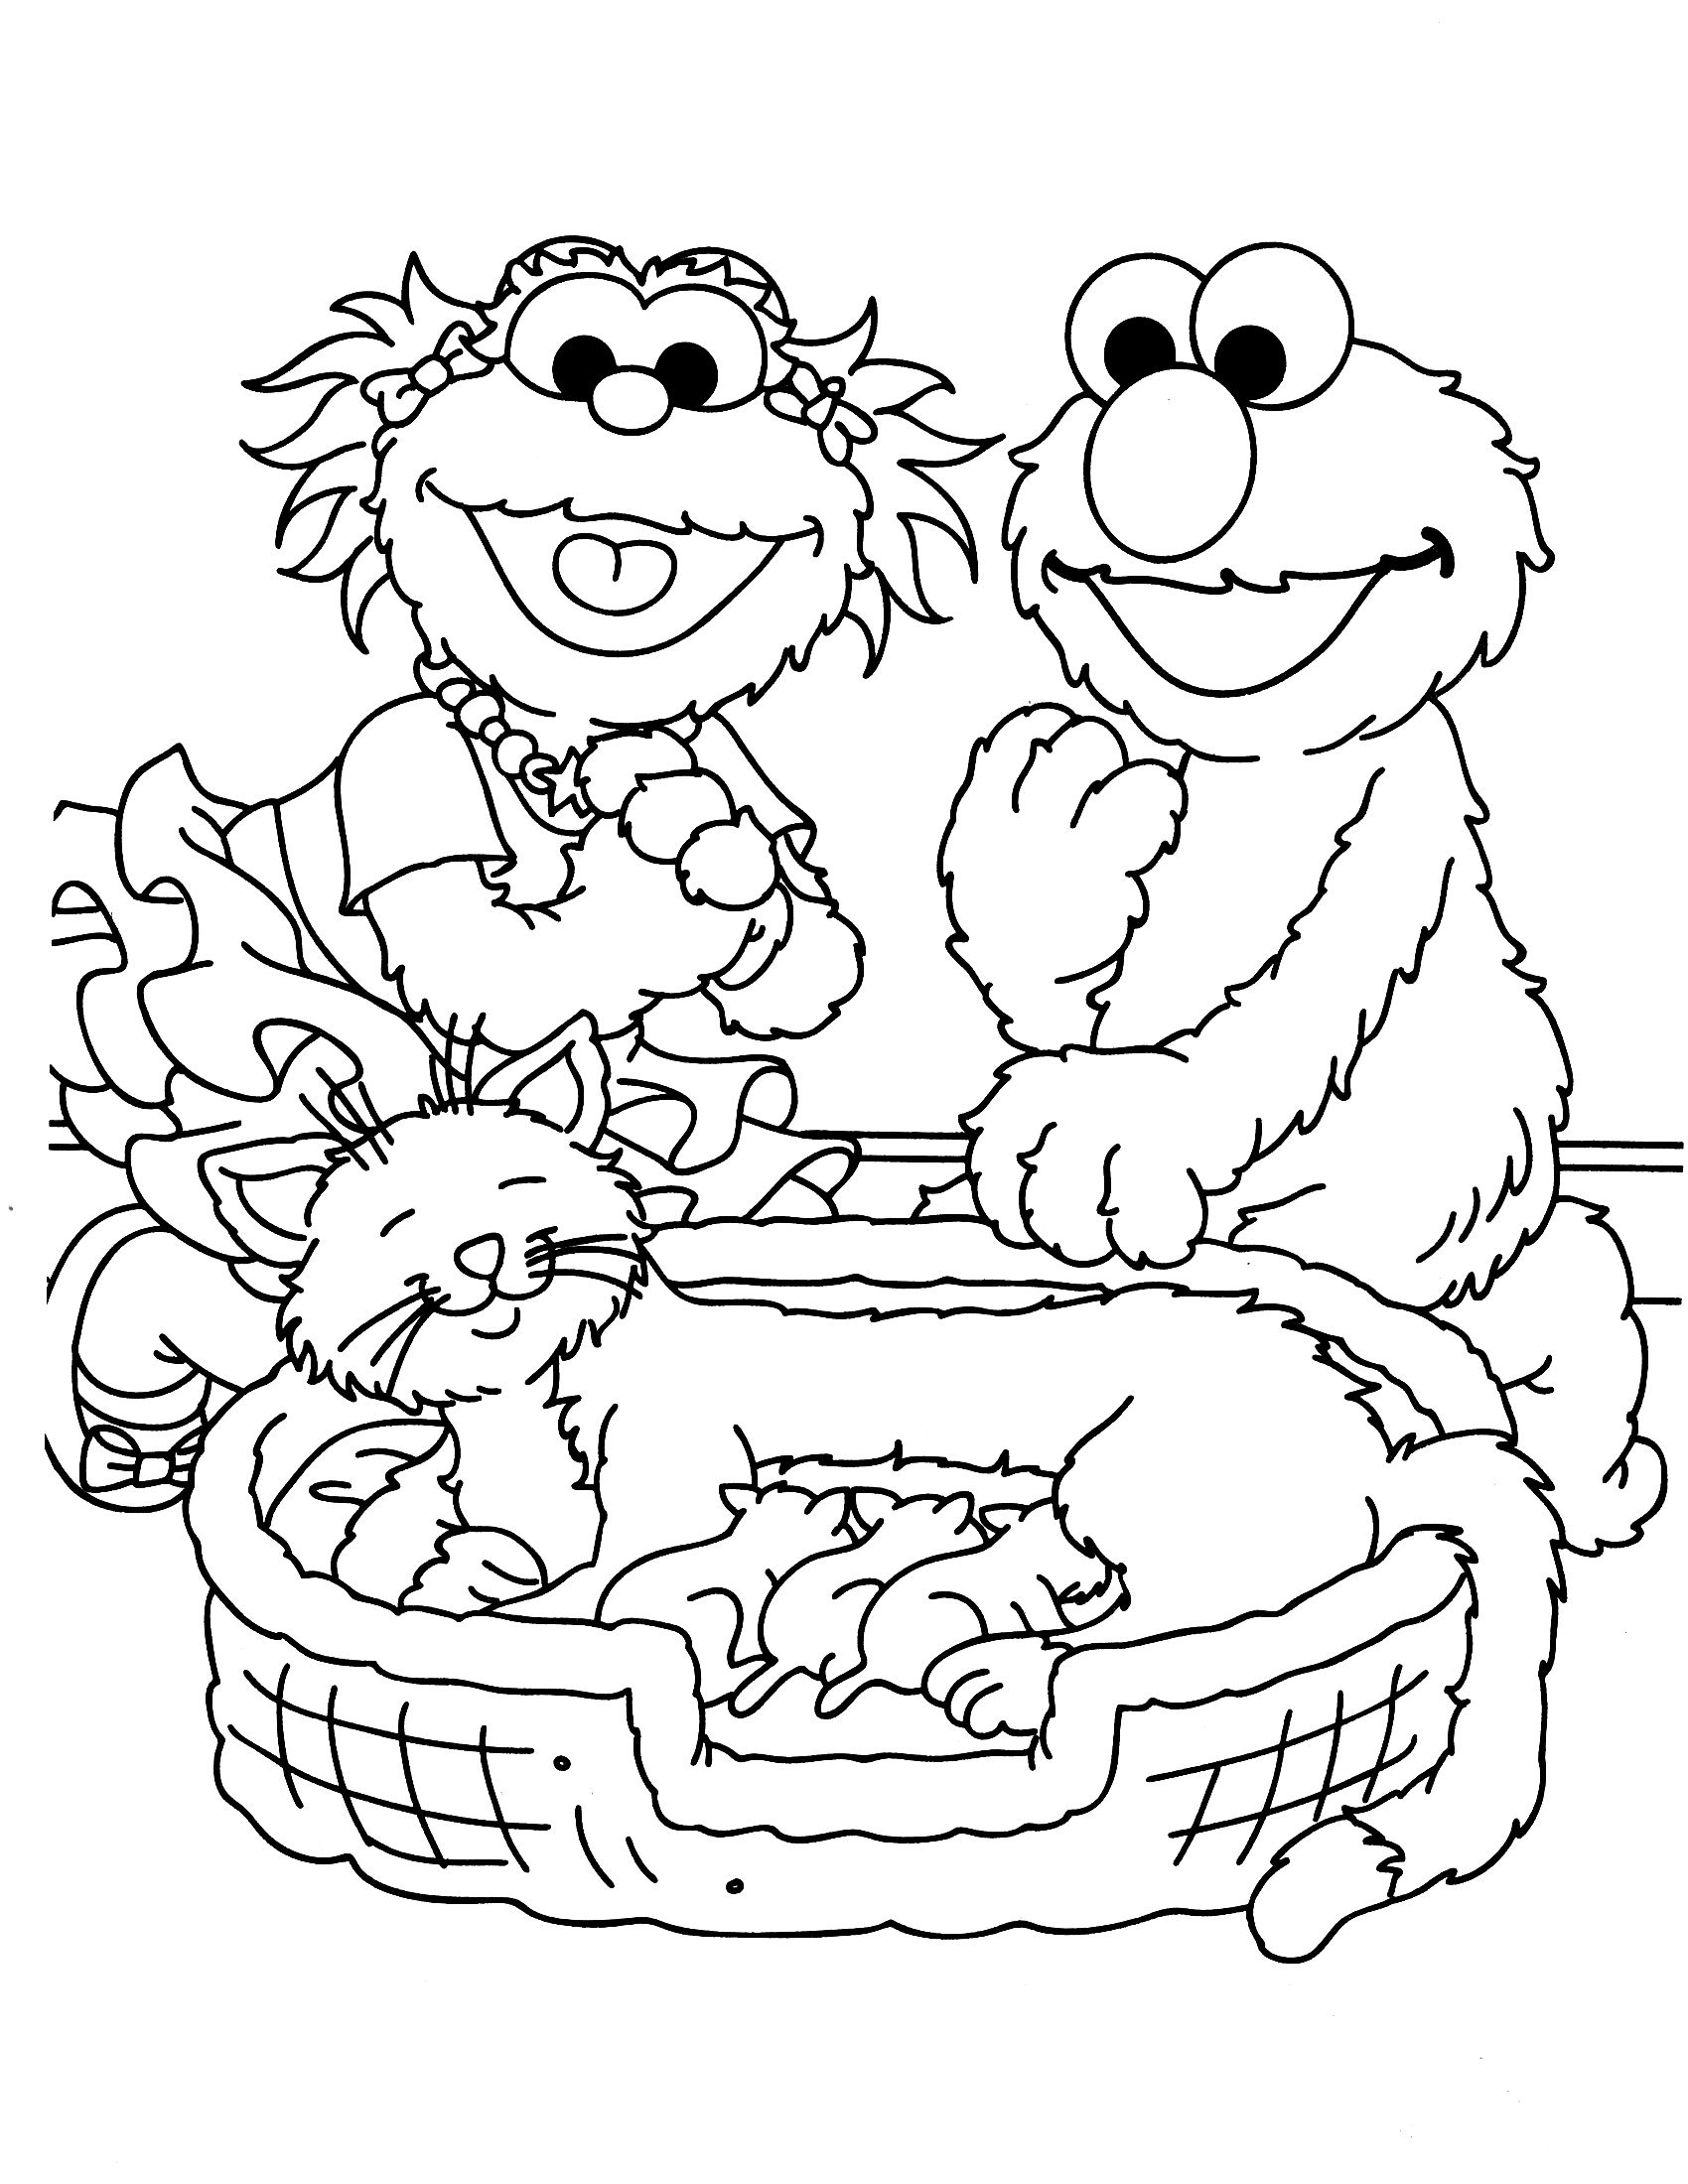 Sesame Street Coloring Pages Games Sesame Street Coloring Pages / It